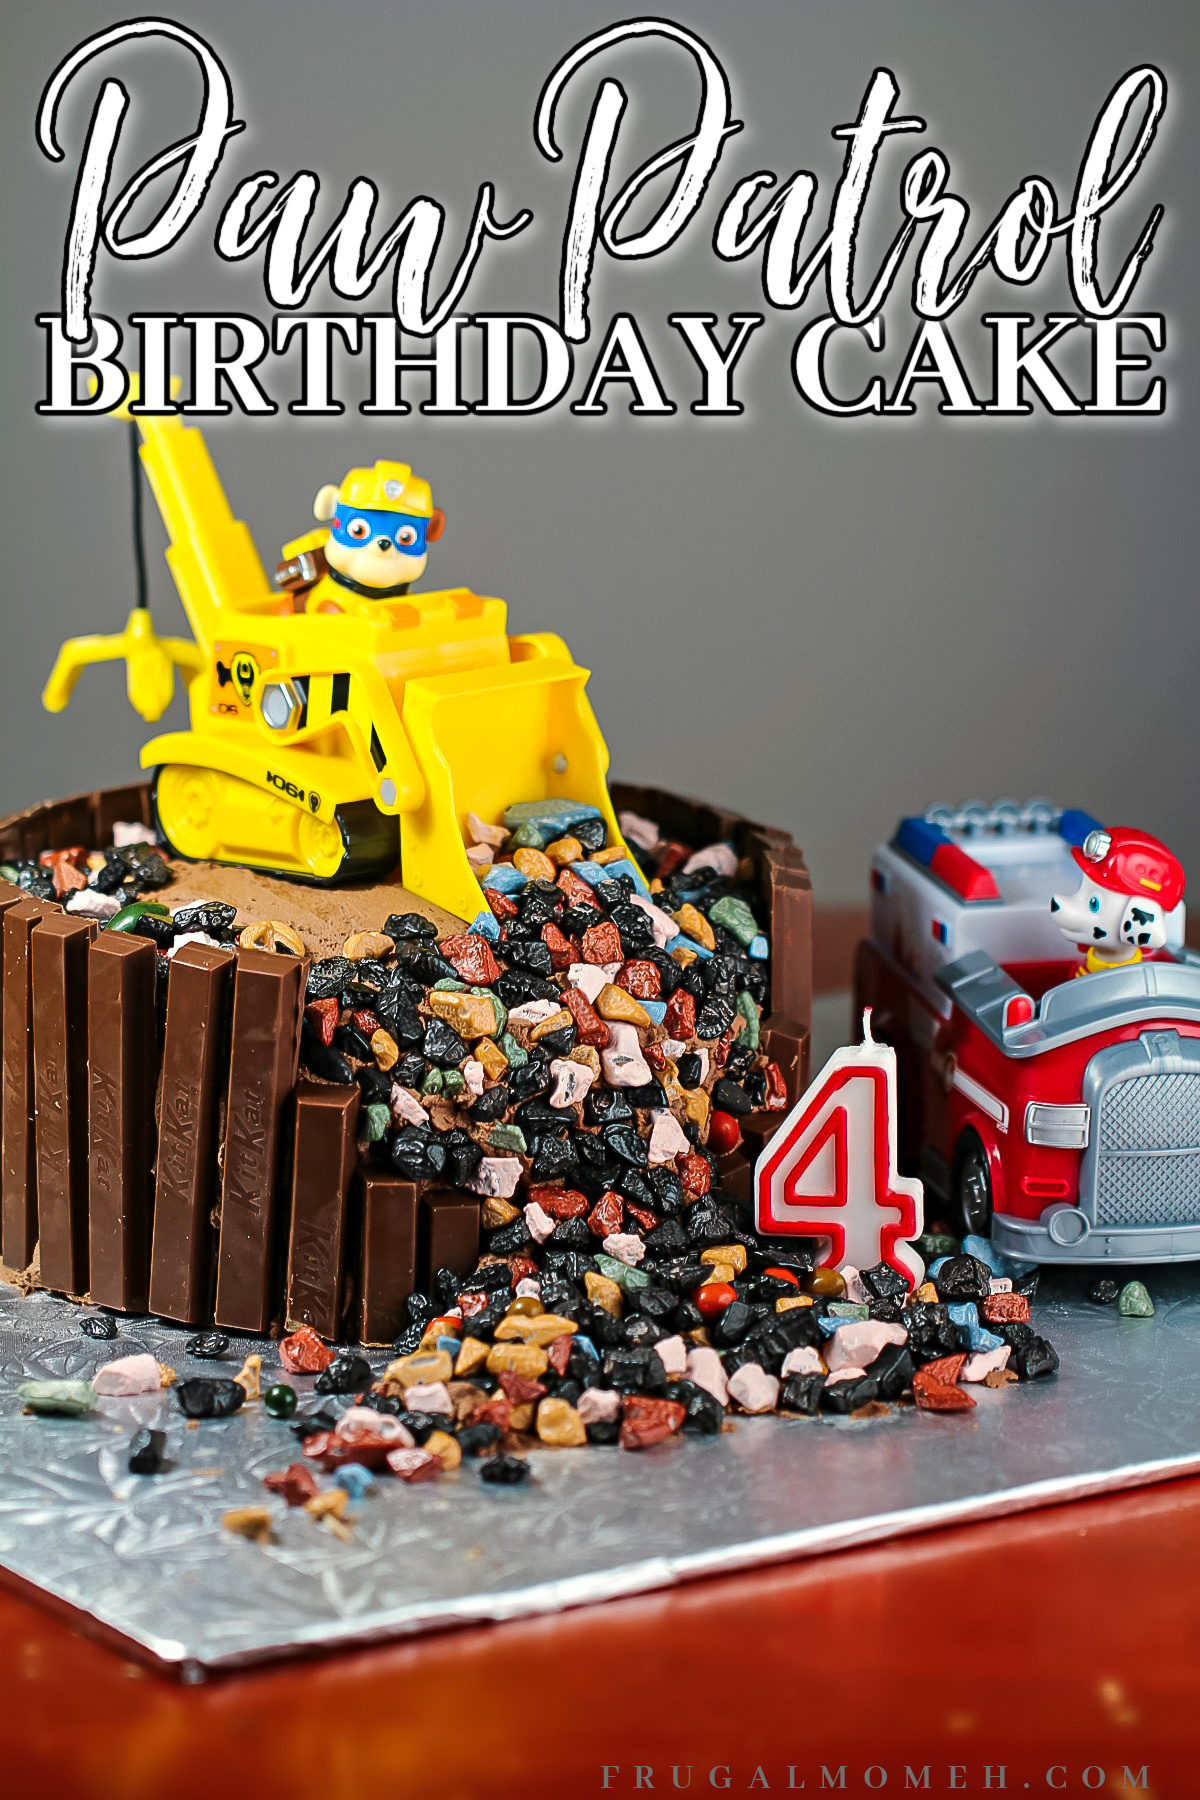 Surprise your child with an unforgettable birthday cake that they'll love! This easy paw patrol birthday cake is simply paw-some!